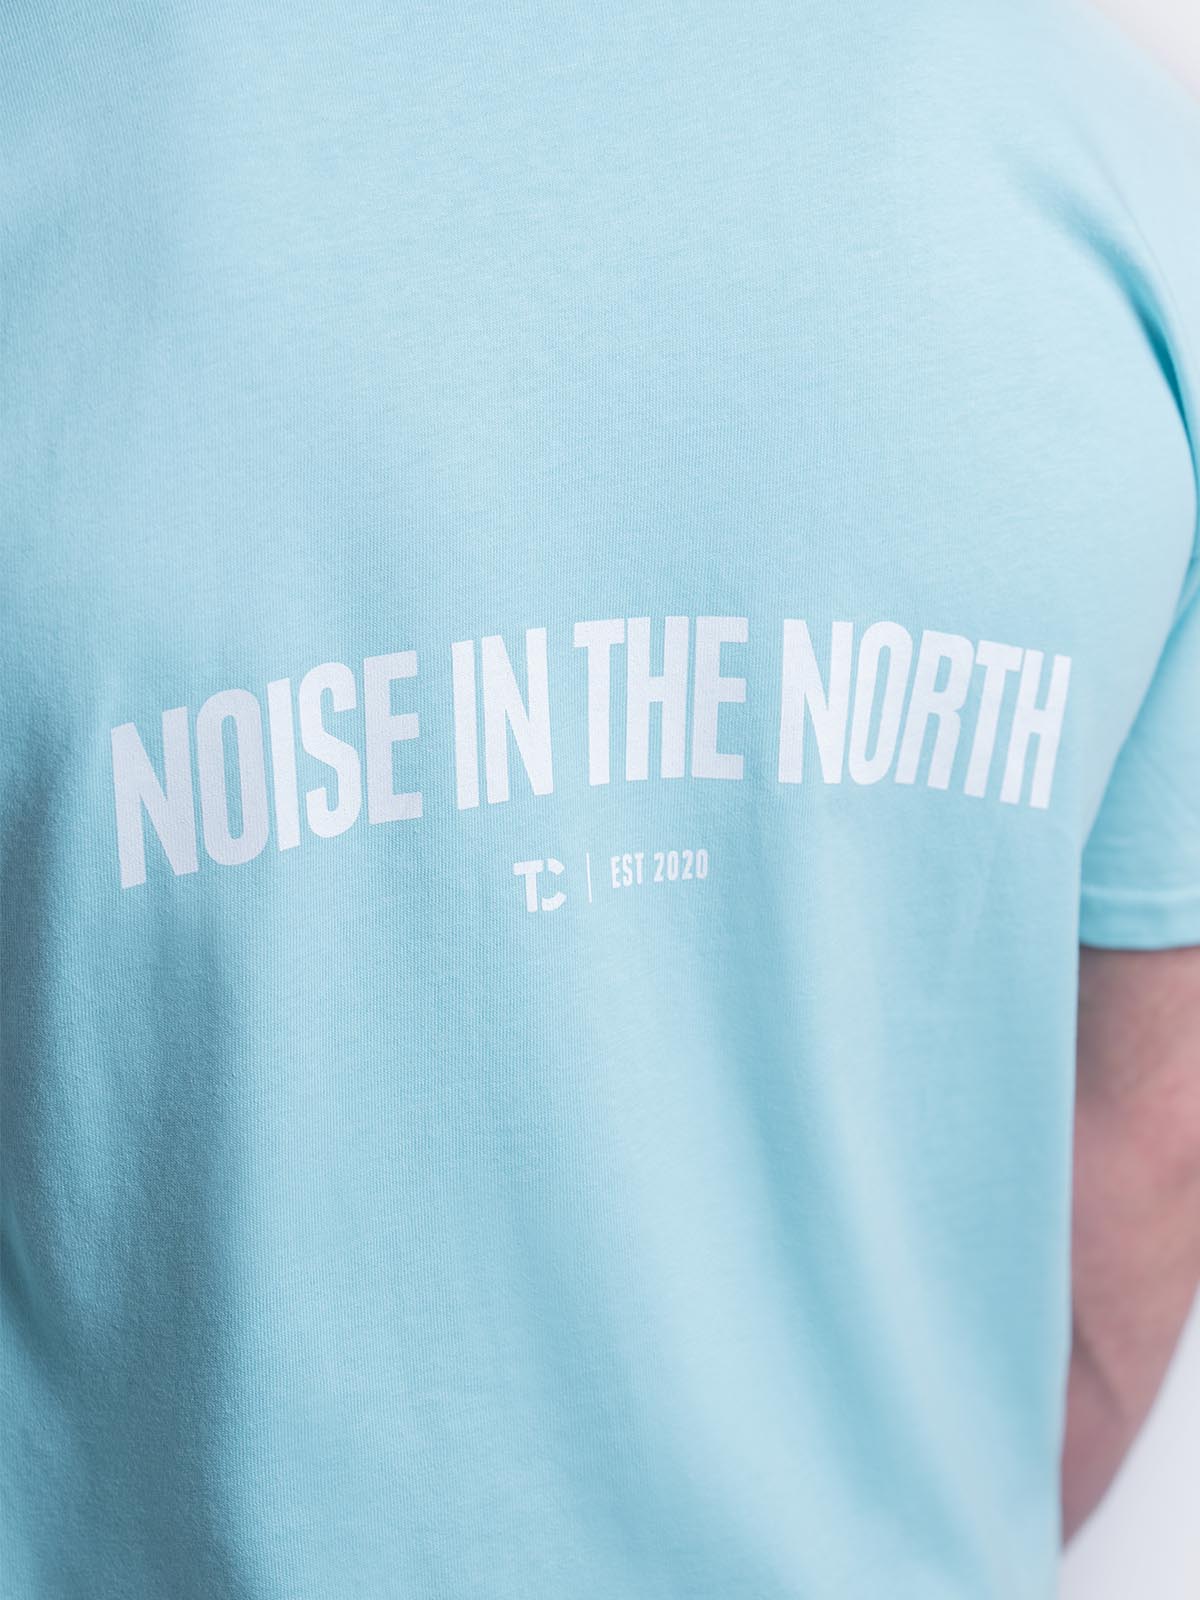 Noise in the North T-Shirt - Beryl Blue